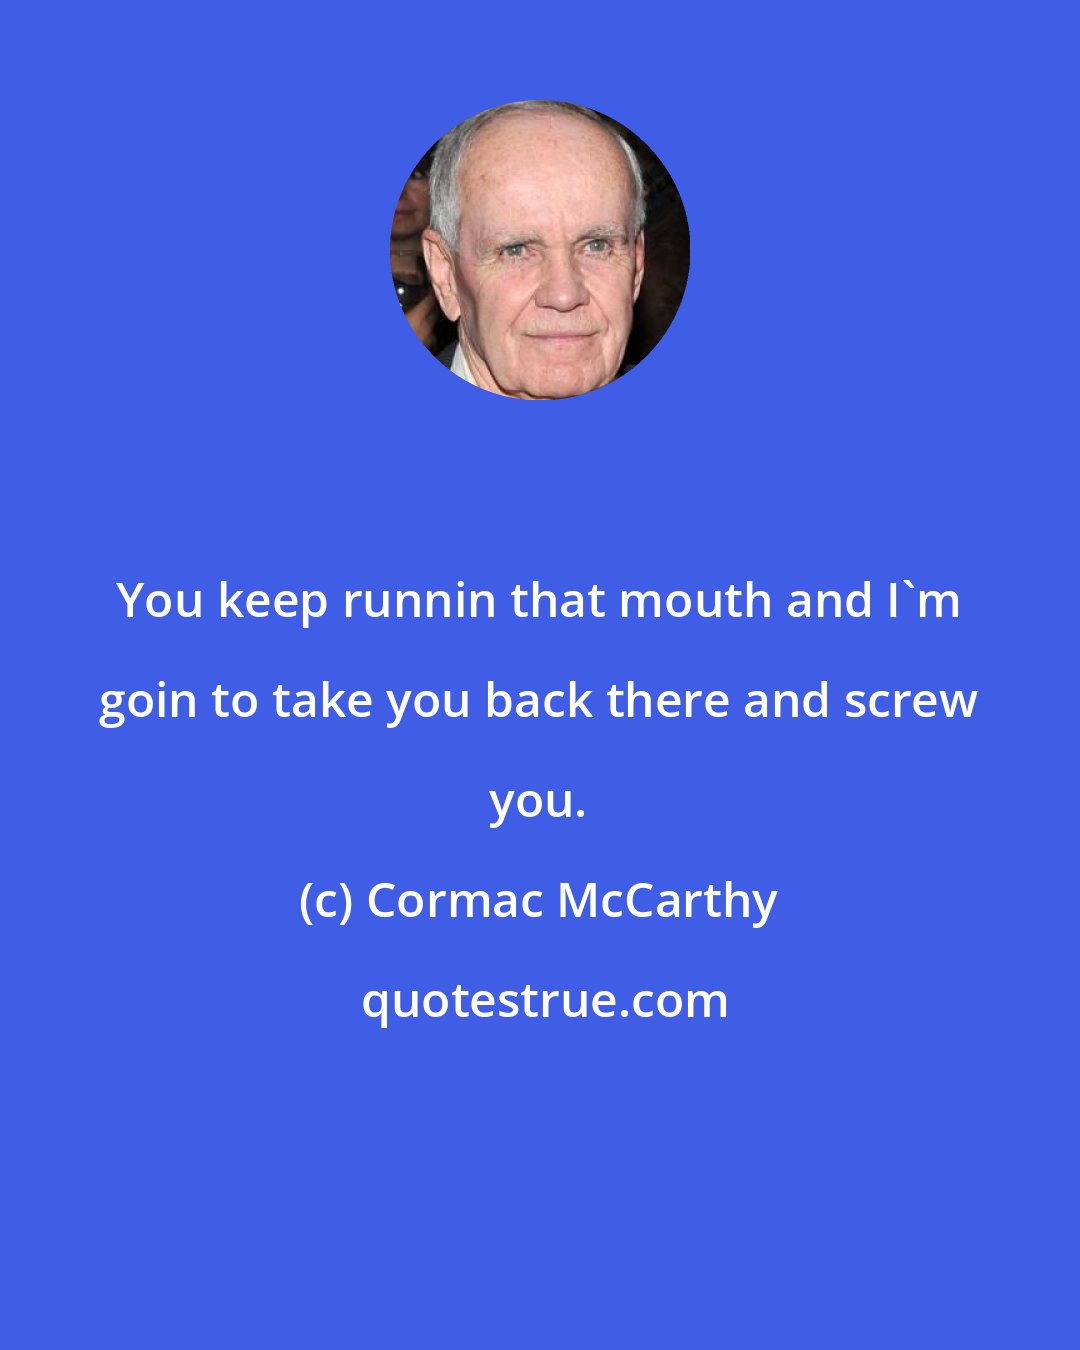 Cormac McCarthy: You keep runnin that mouth and I'm goin to take you back there and screw you.